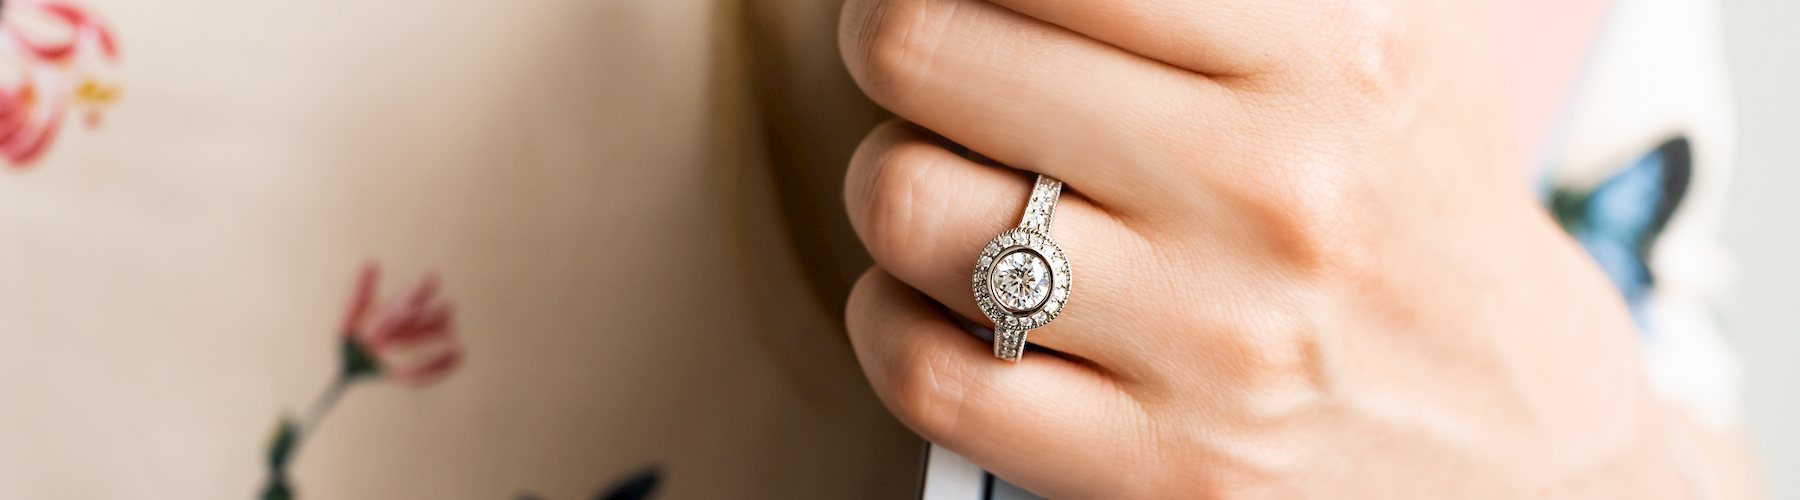 engagement ring for women in which hand